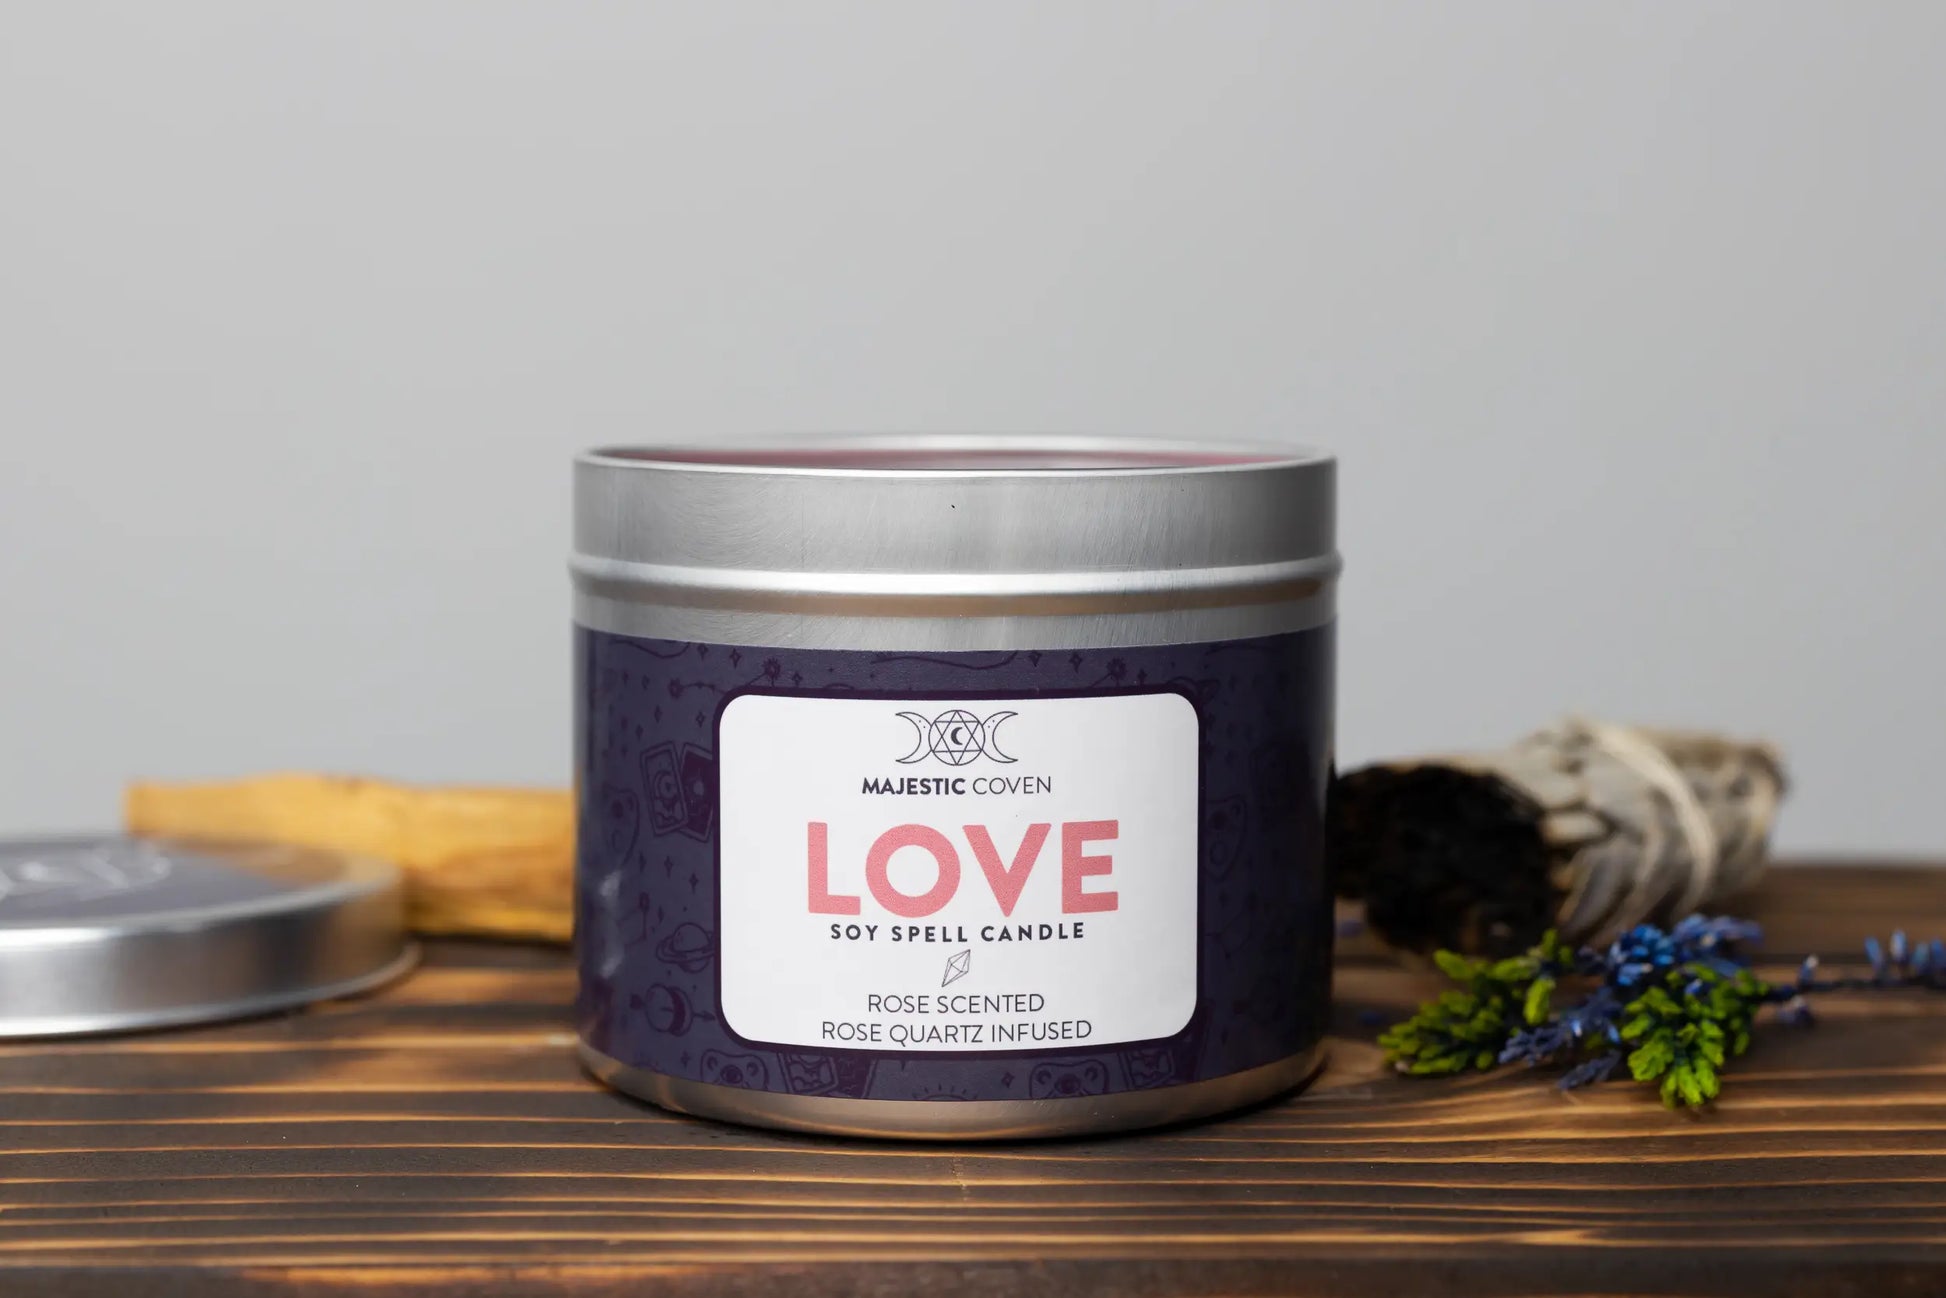 Love - Rose Quartz Infused Crystal Soy Candle - Spellbound